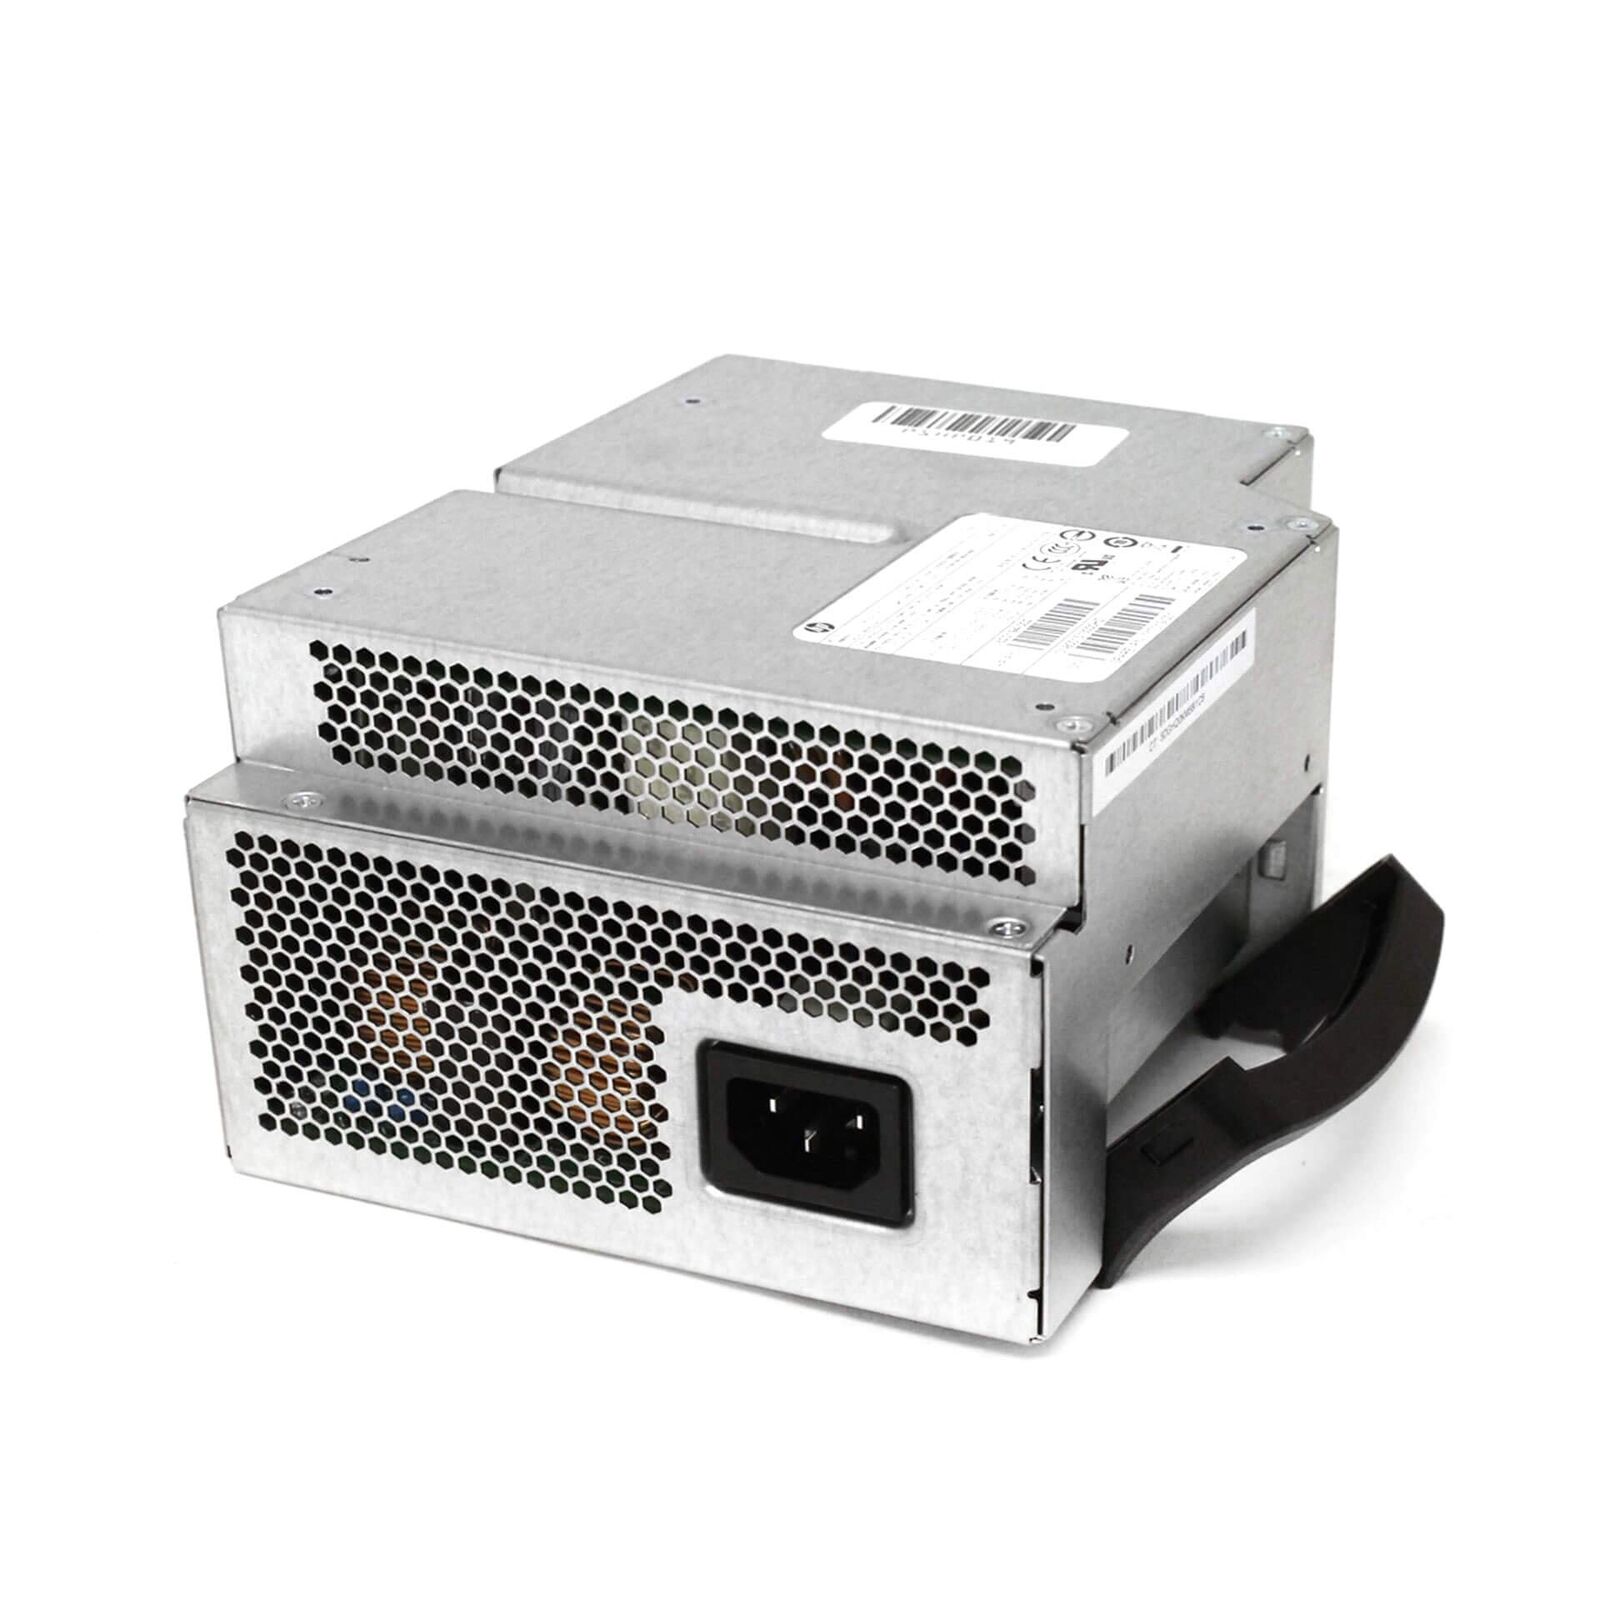 HP Z640 Workstation PSU Power Supply Unit 758468-001 719797-002 925w D12-925P1A - Click Image to Close